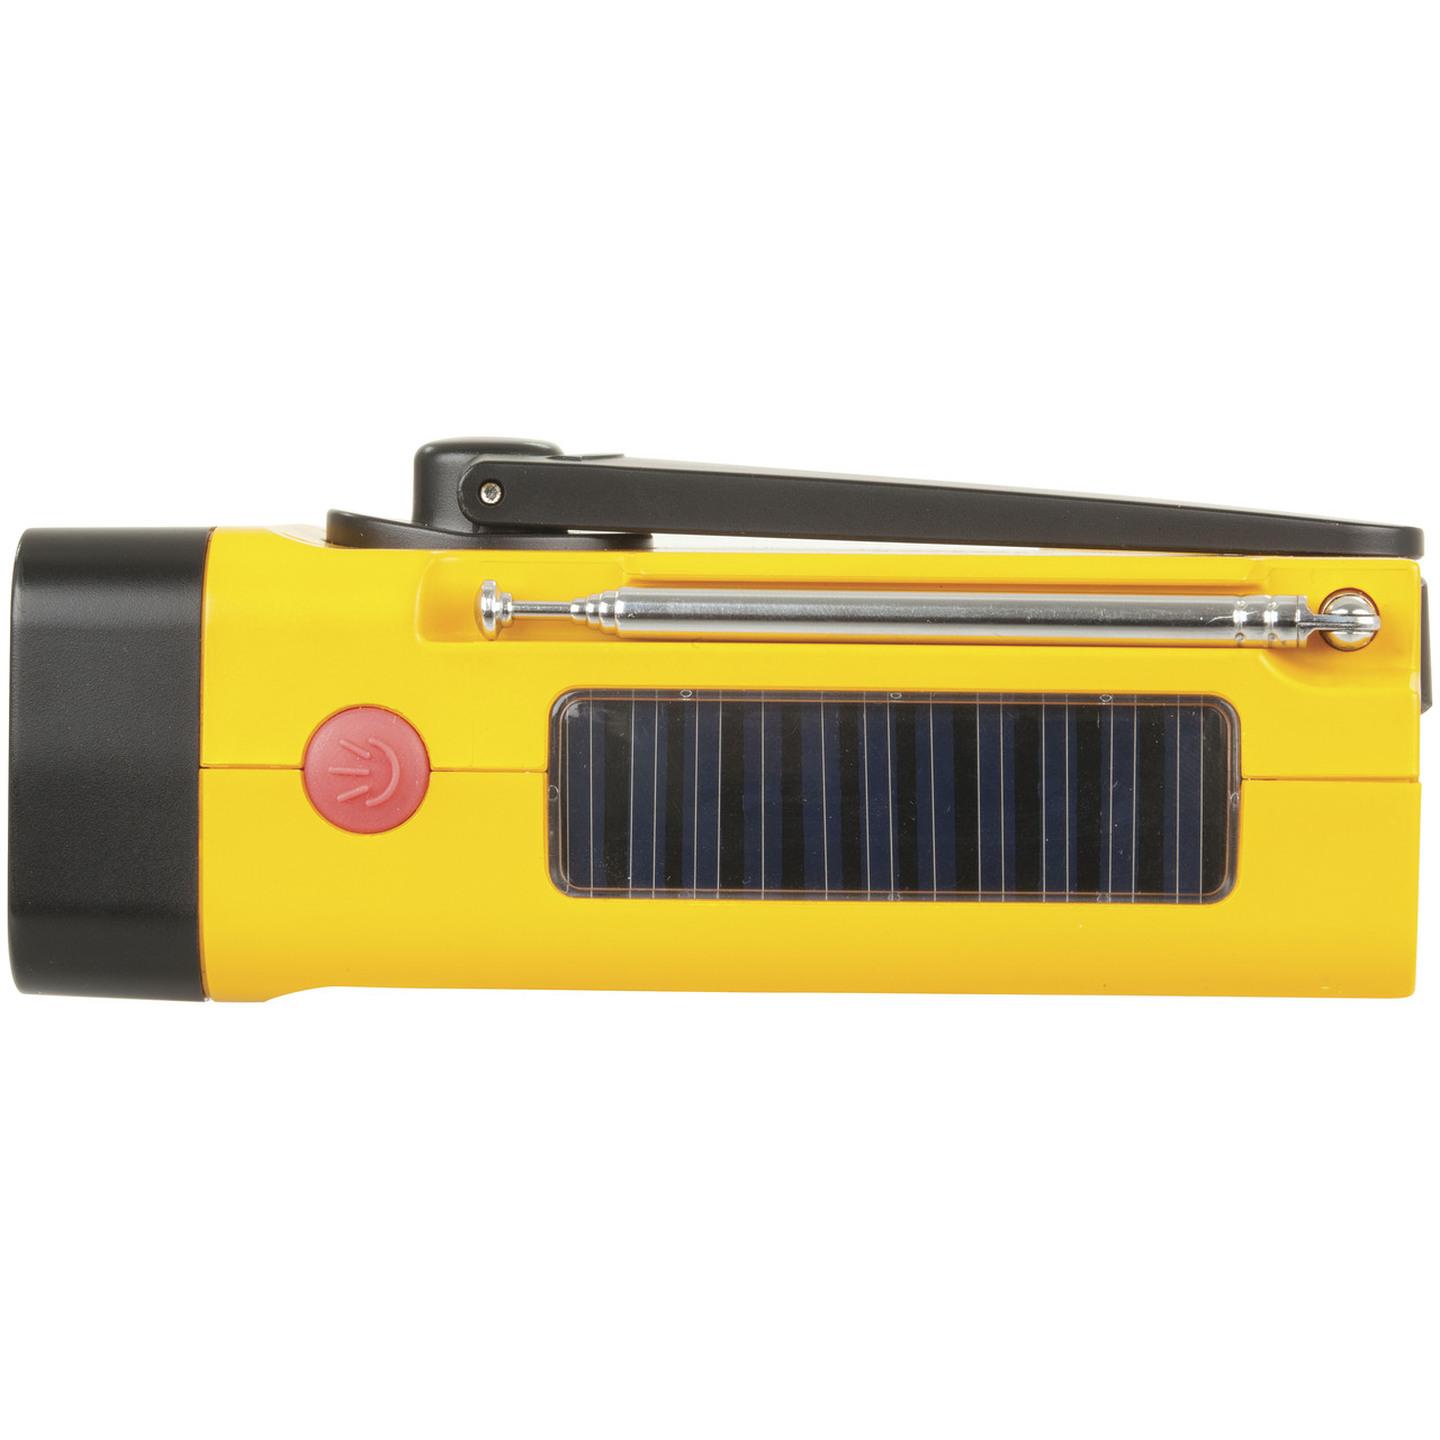 LED Torch/Radio/USB Charger Dynamo with Built-in Solar Panel